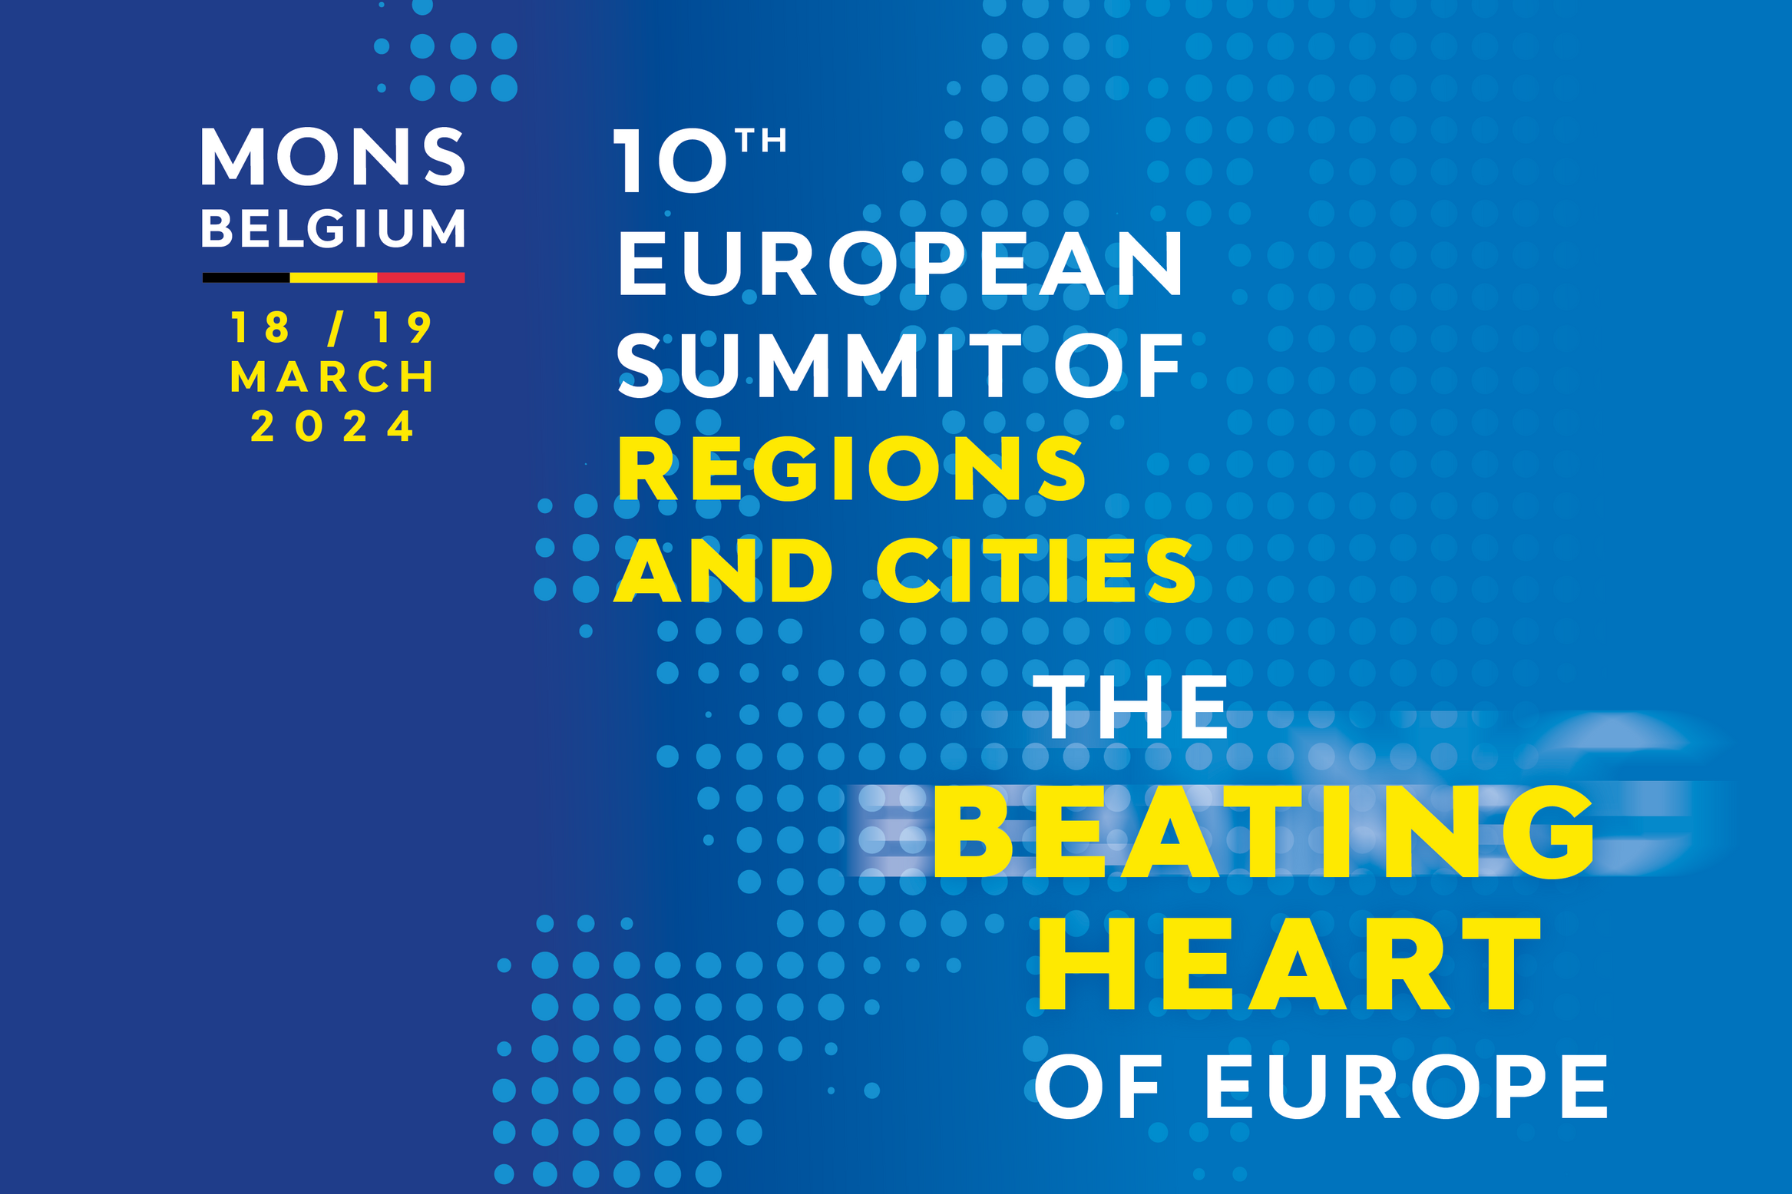 10th European Summit of Regions and Cities